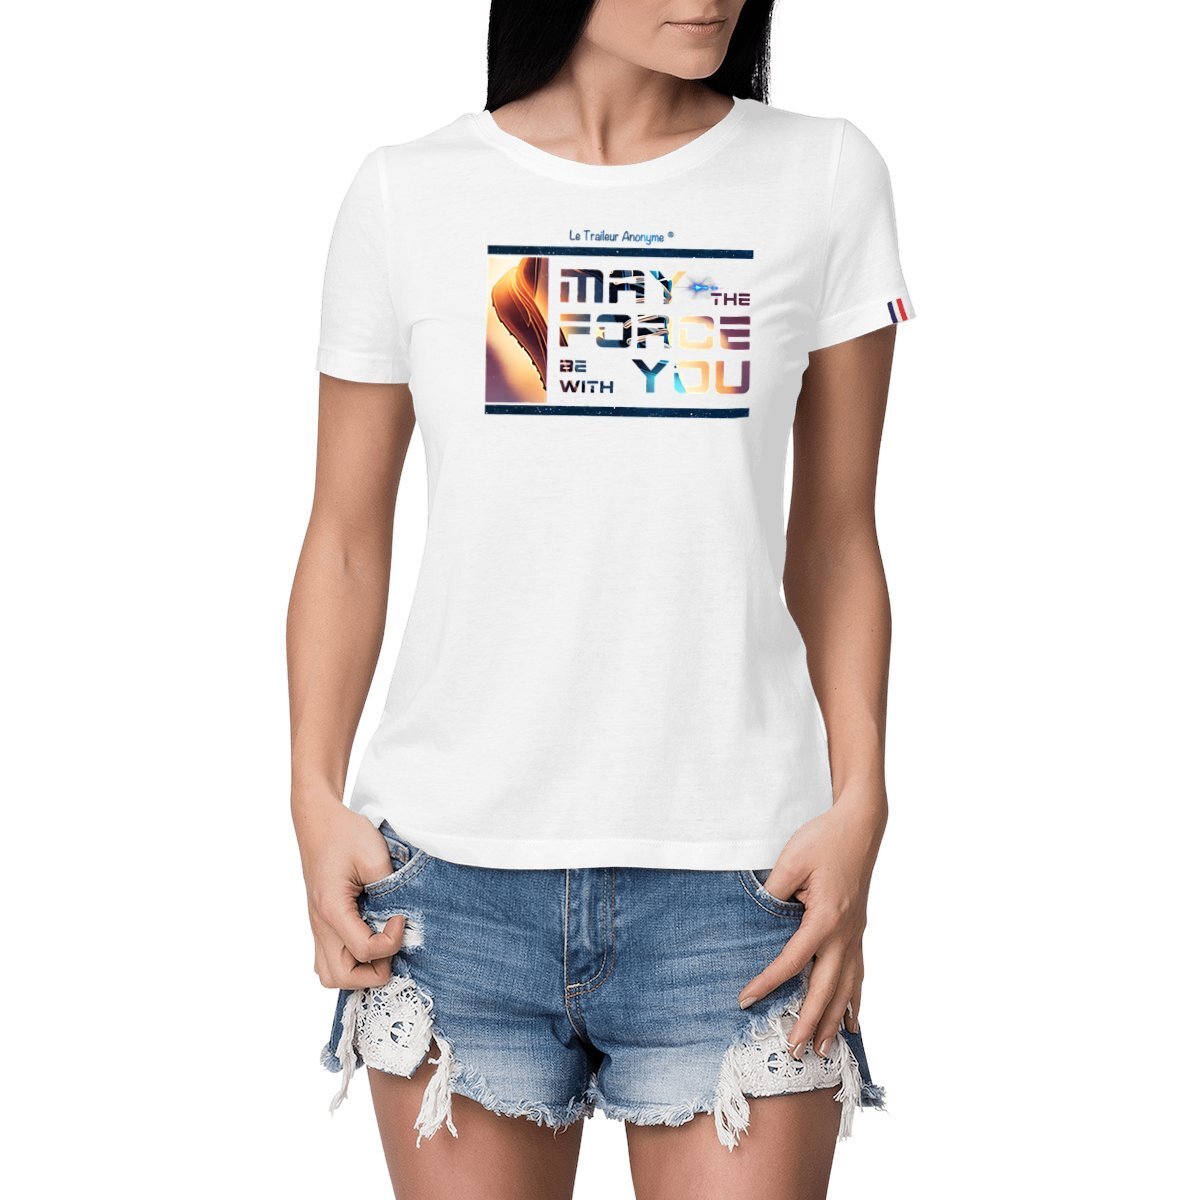 T-Shirt - Femme - 🇫🇷Made in France🇫🇷 - Force - Le Traileur Anonyme